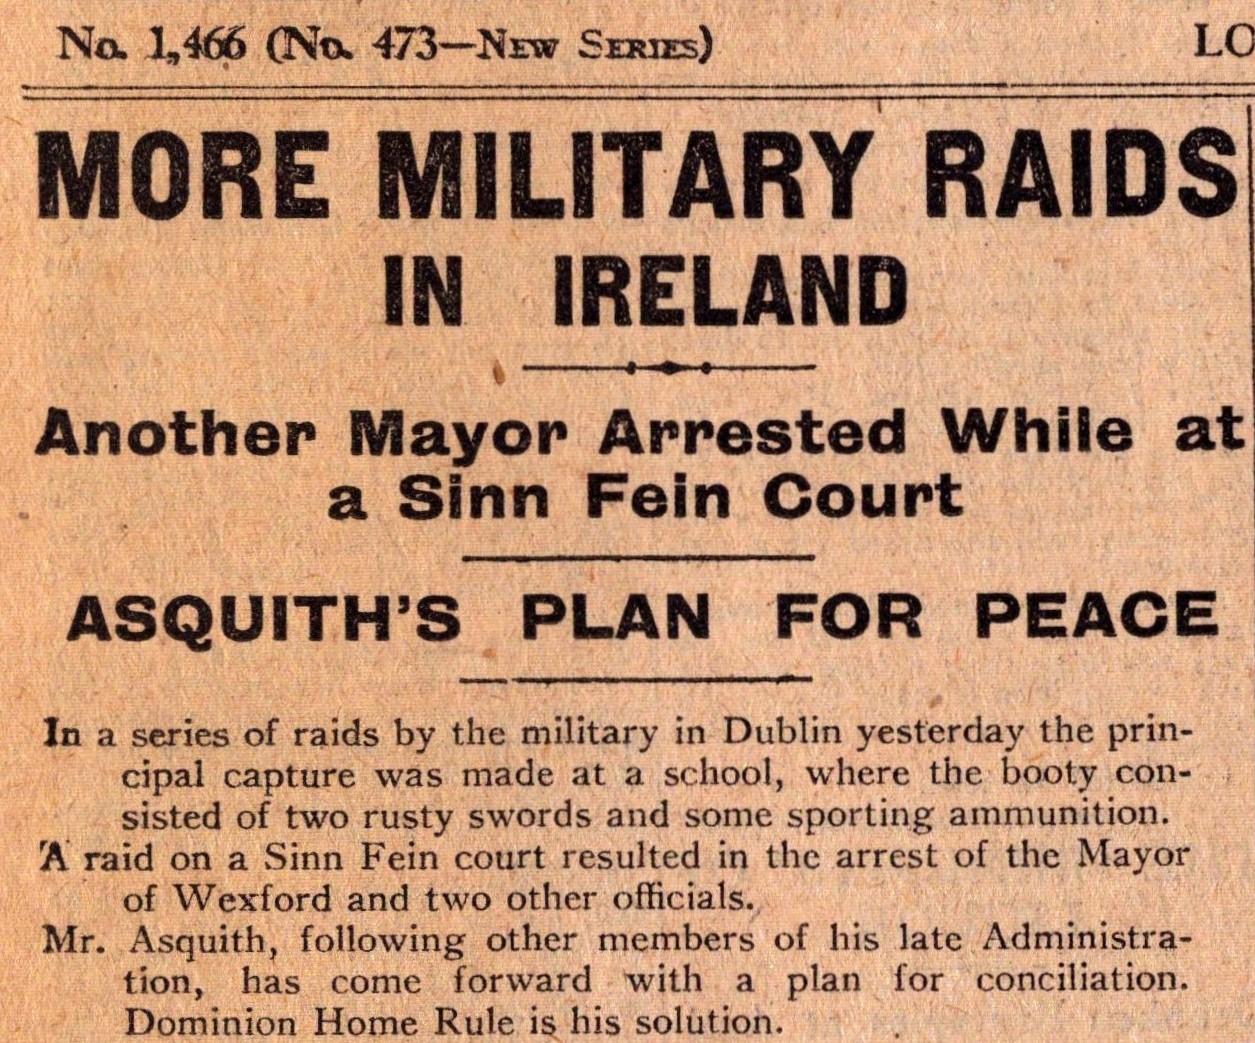 Irish War of Independence News Reports Black & Tans, Hunger Strikes 1920-2. - Image 6 of 8